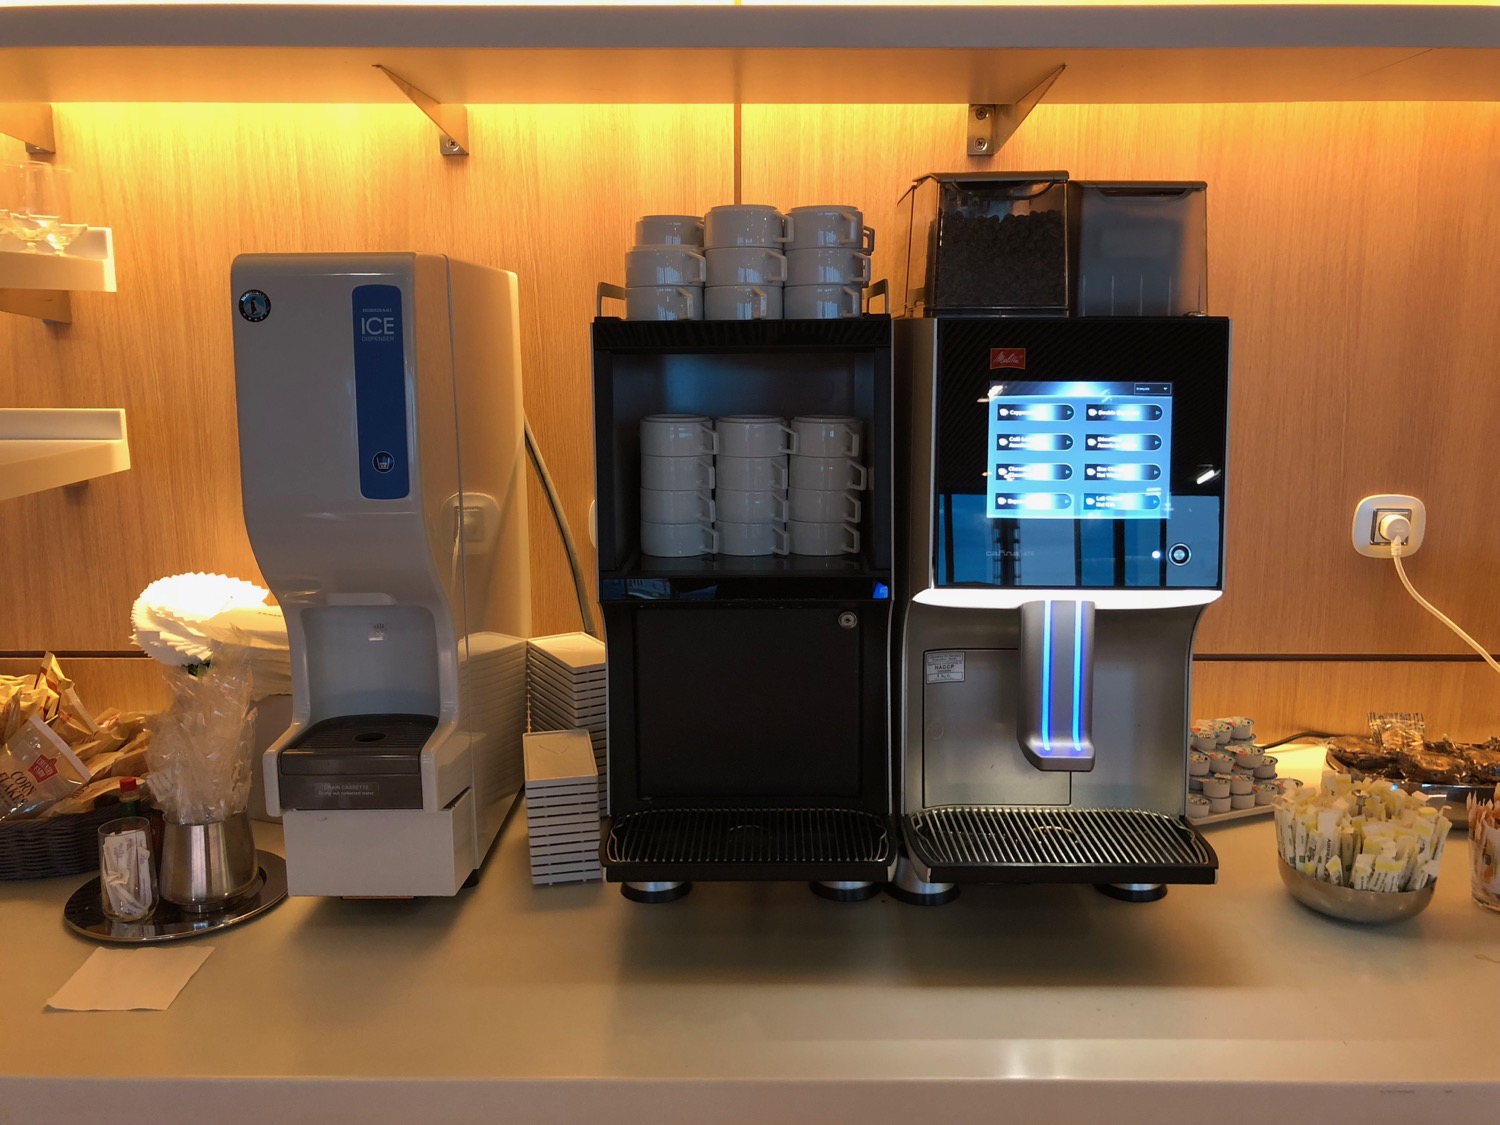 a coffee machine and coffee maker on a counter